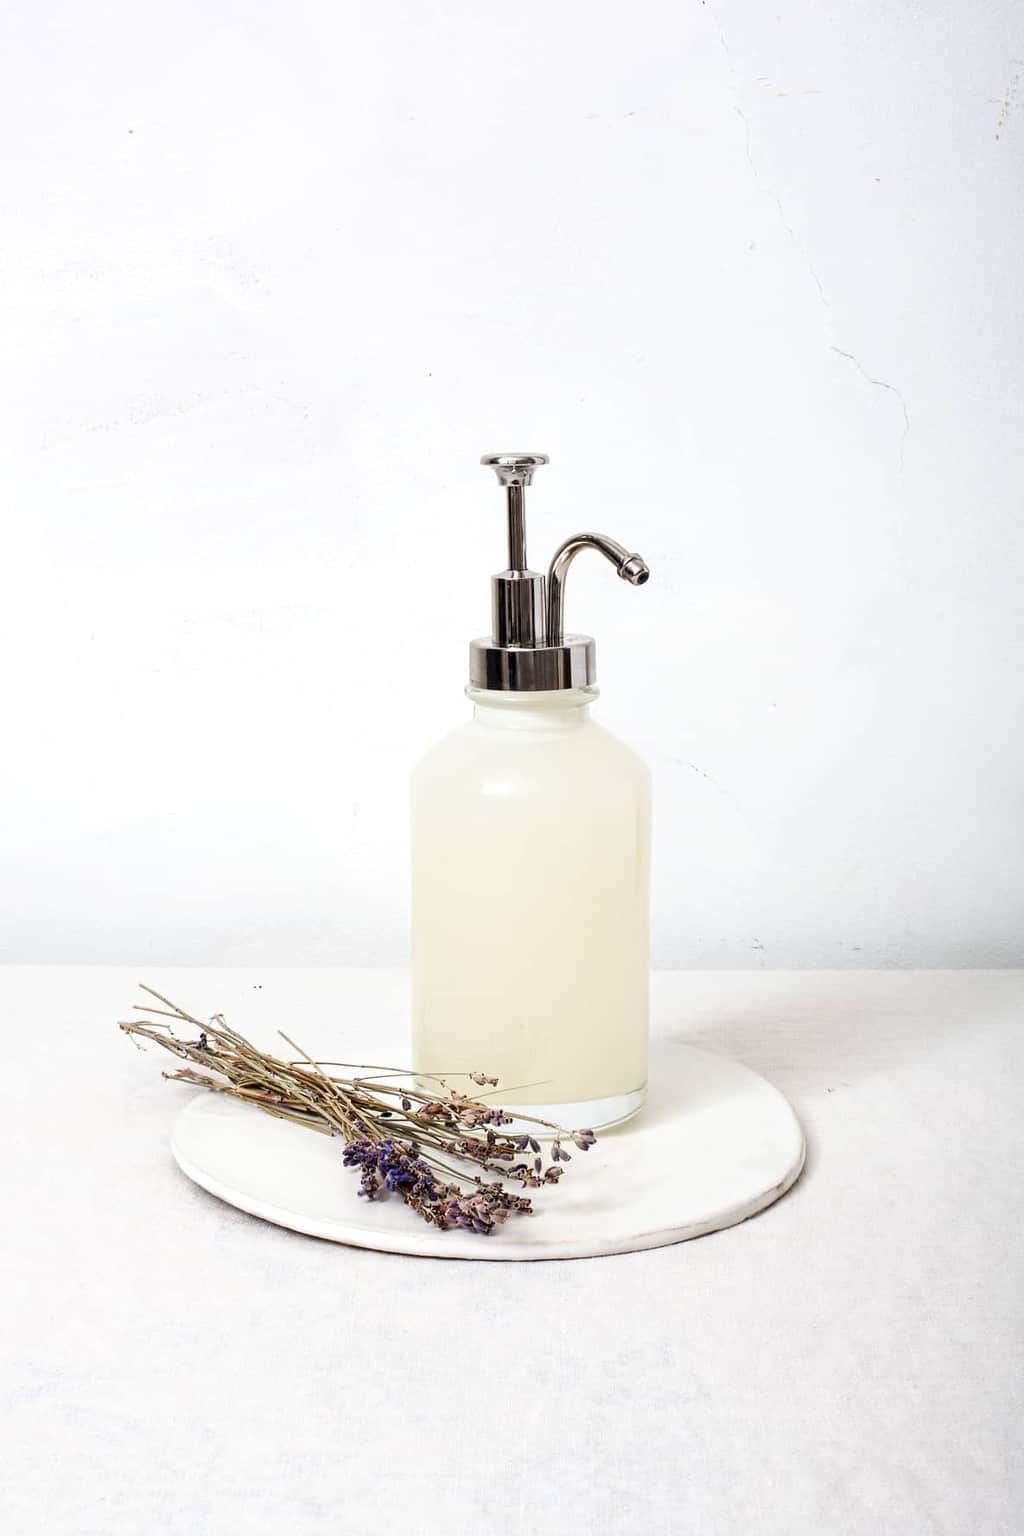 5 Ways To Make Your Own Homemade Liquid Hand Soap